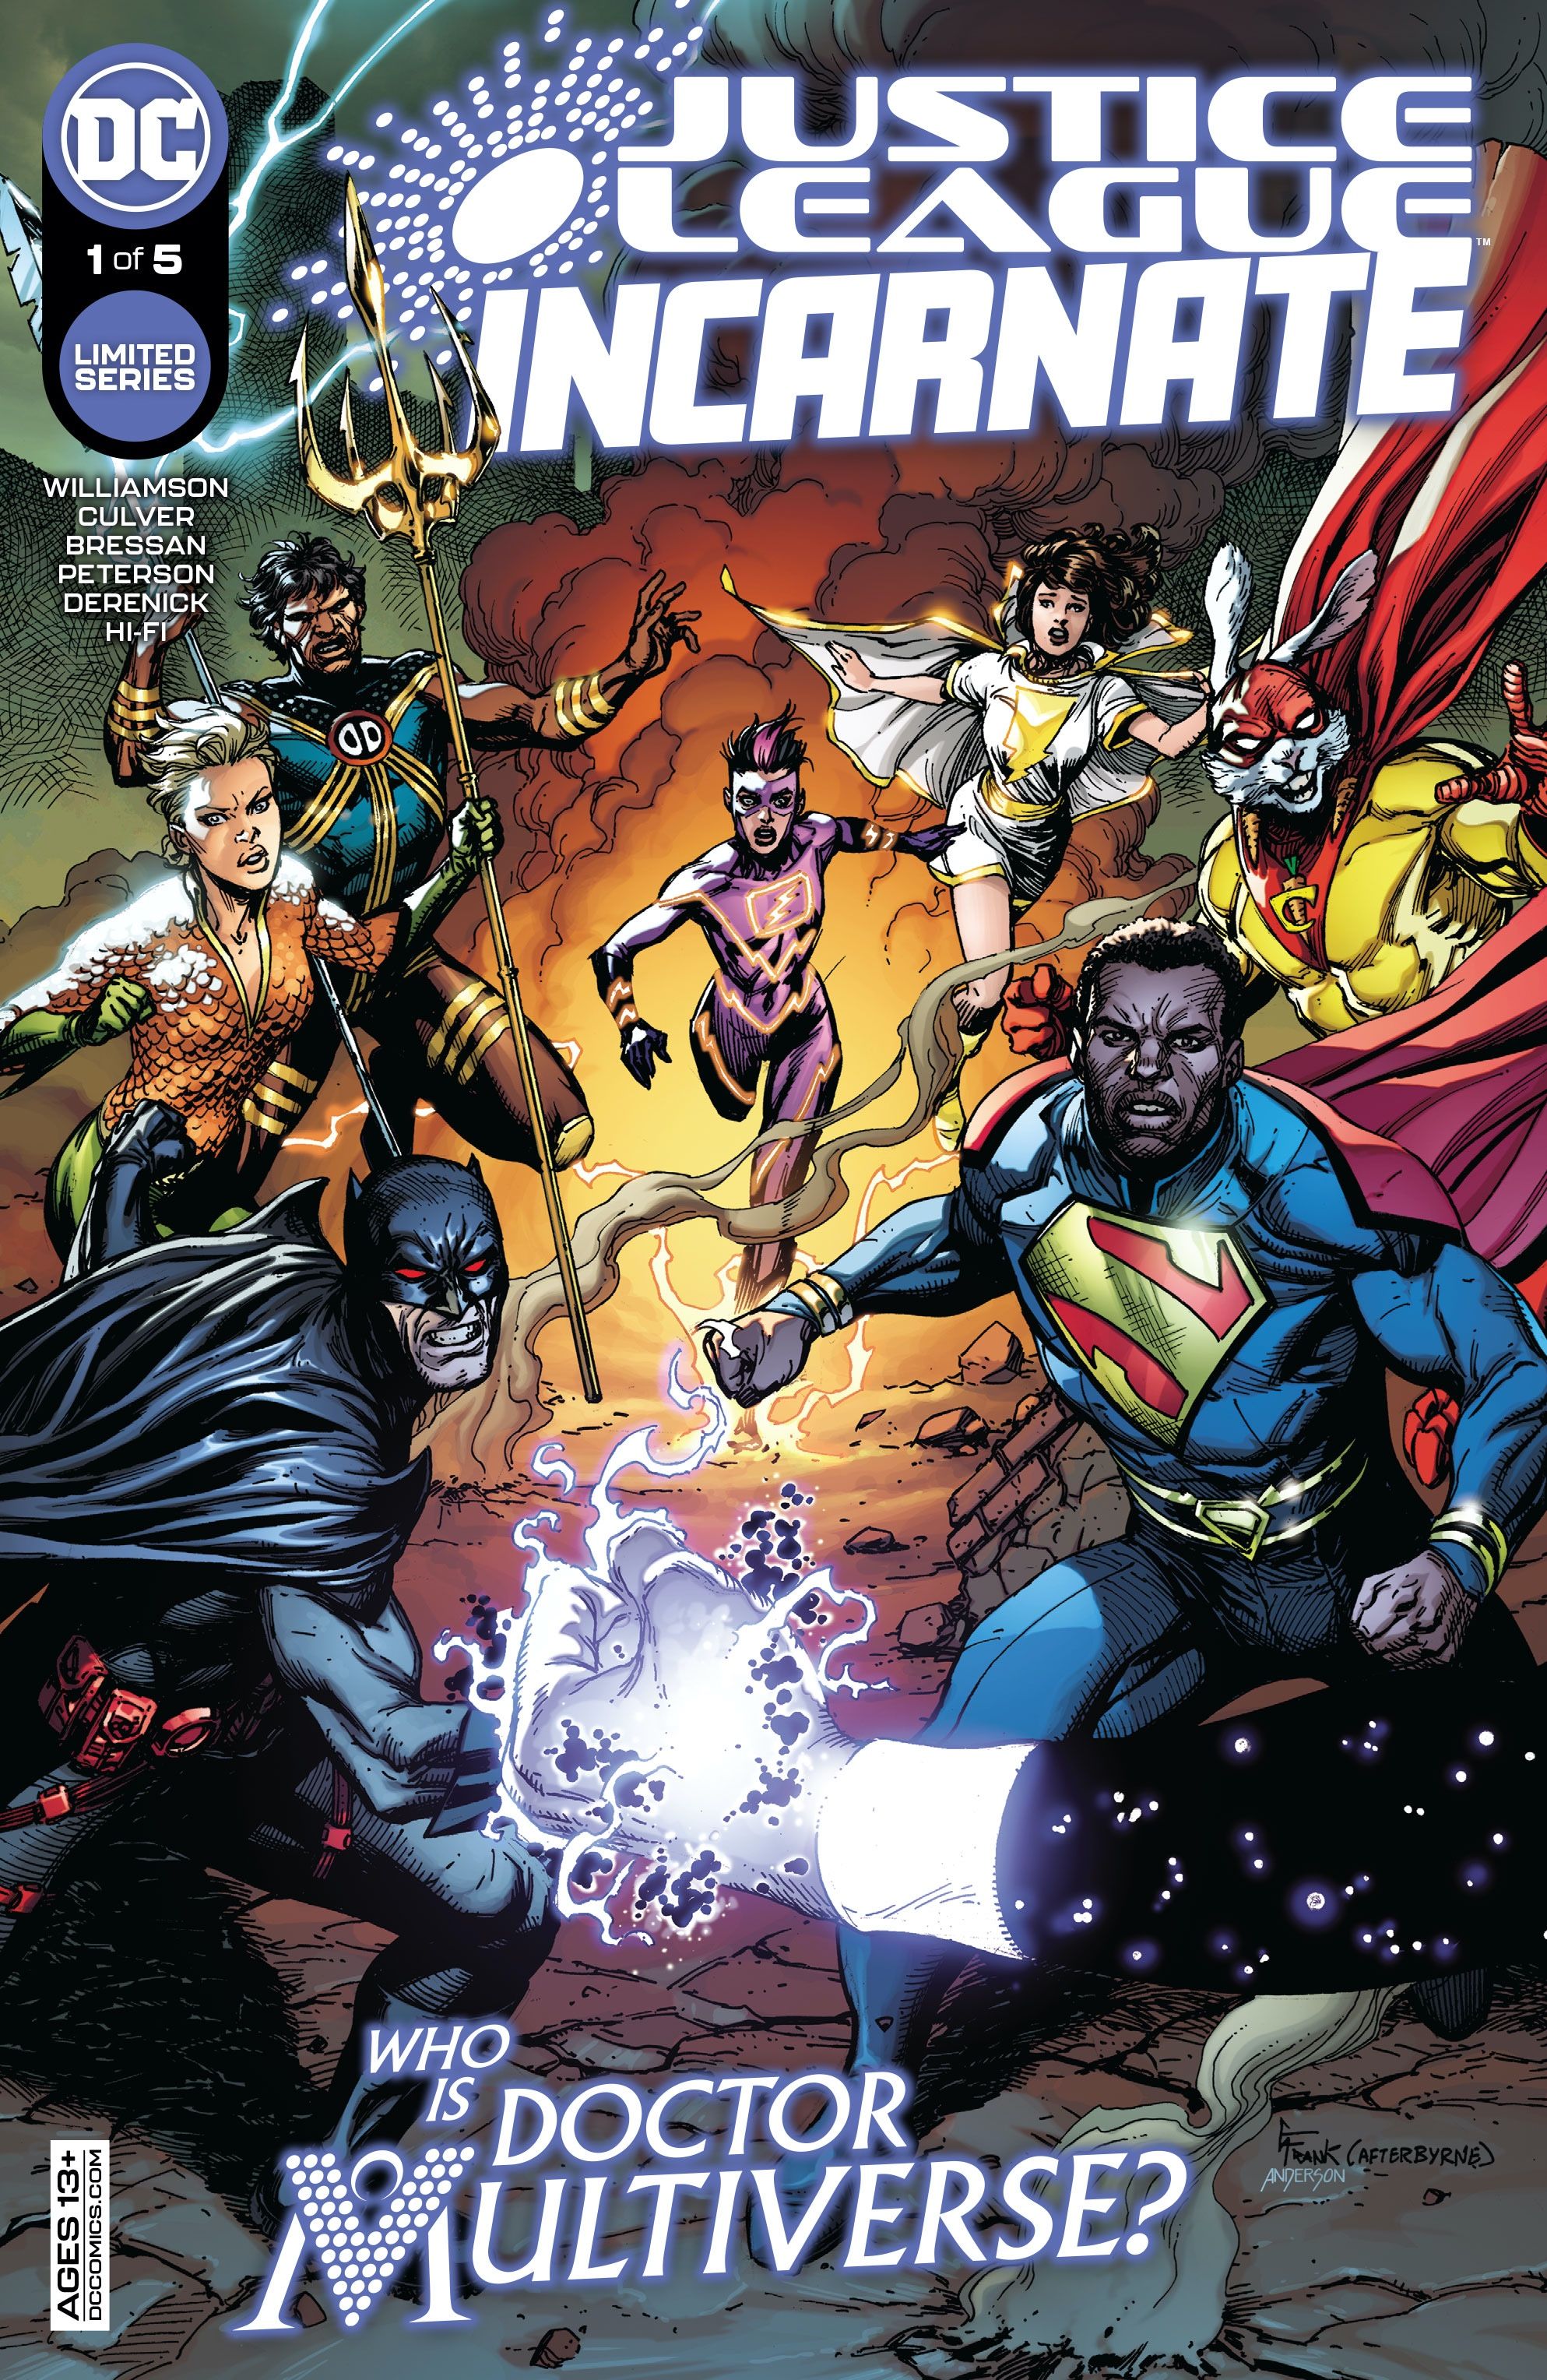 The Justice League of DCs Multiverse Prepares for War in New Preview